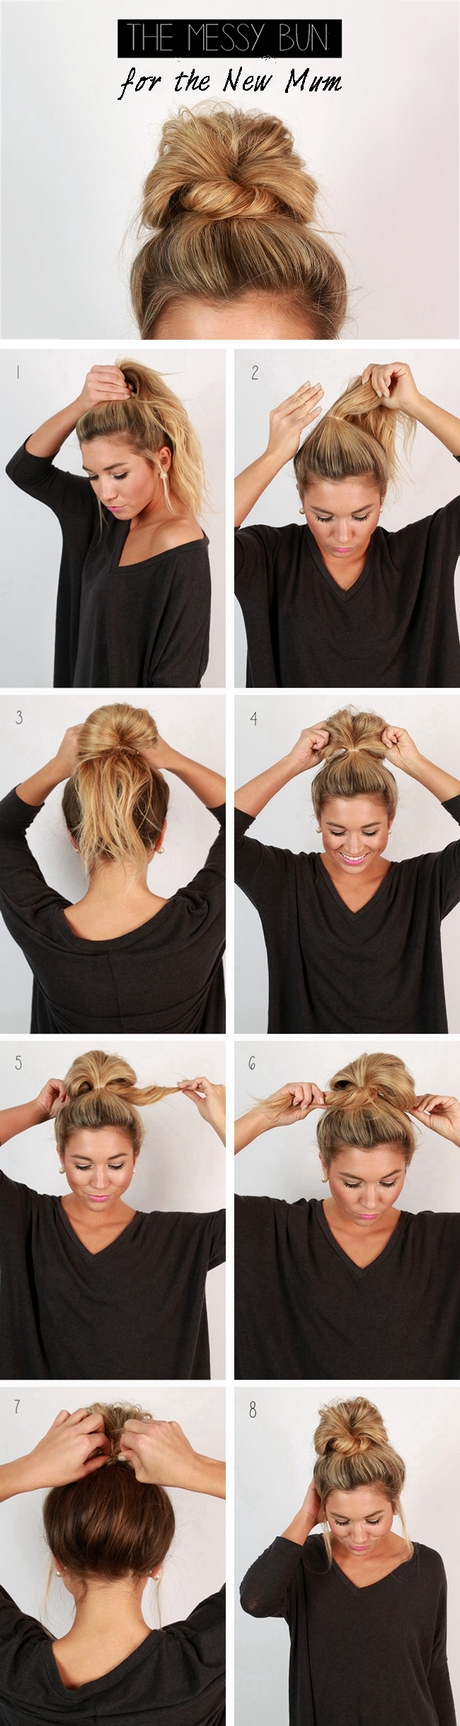 Easy ways to put short hair up easy-ways-to-put-short-hair-up-50_12